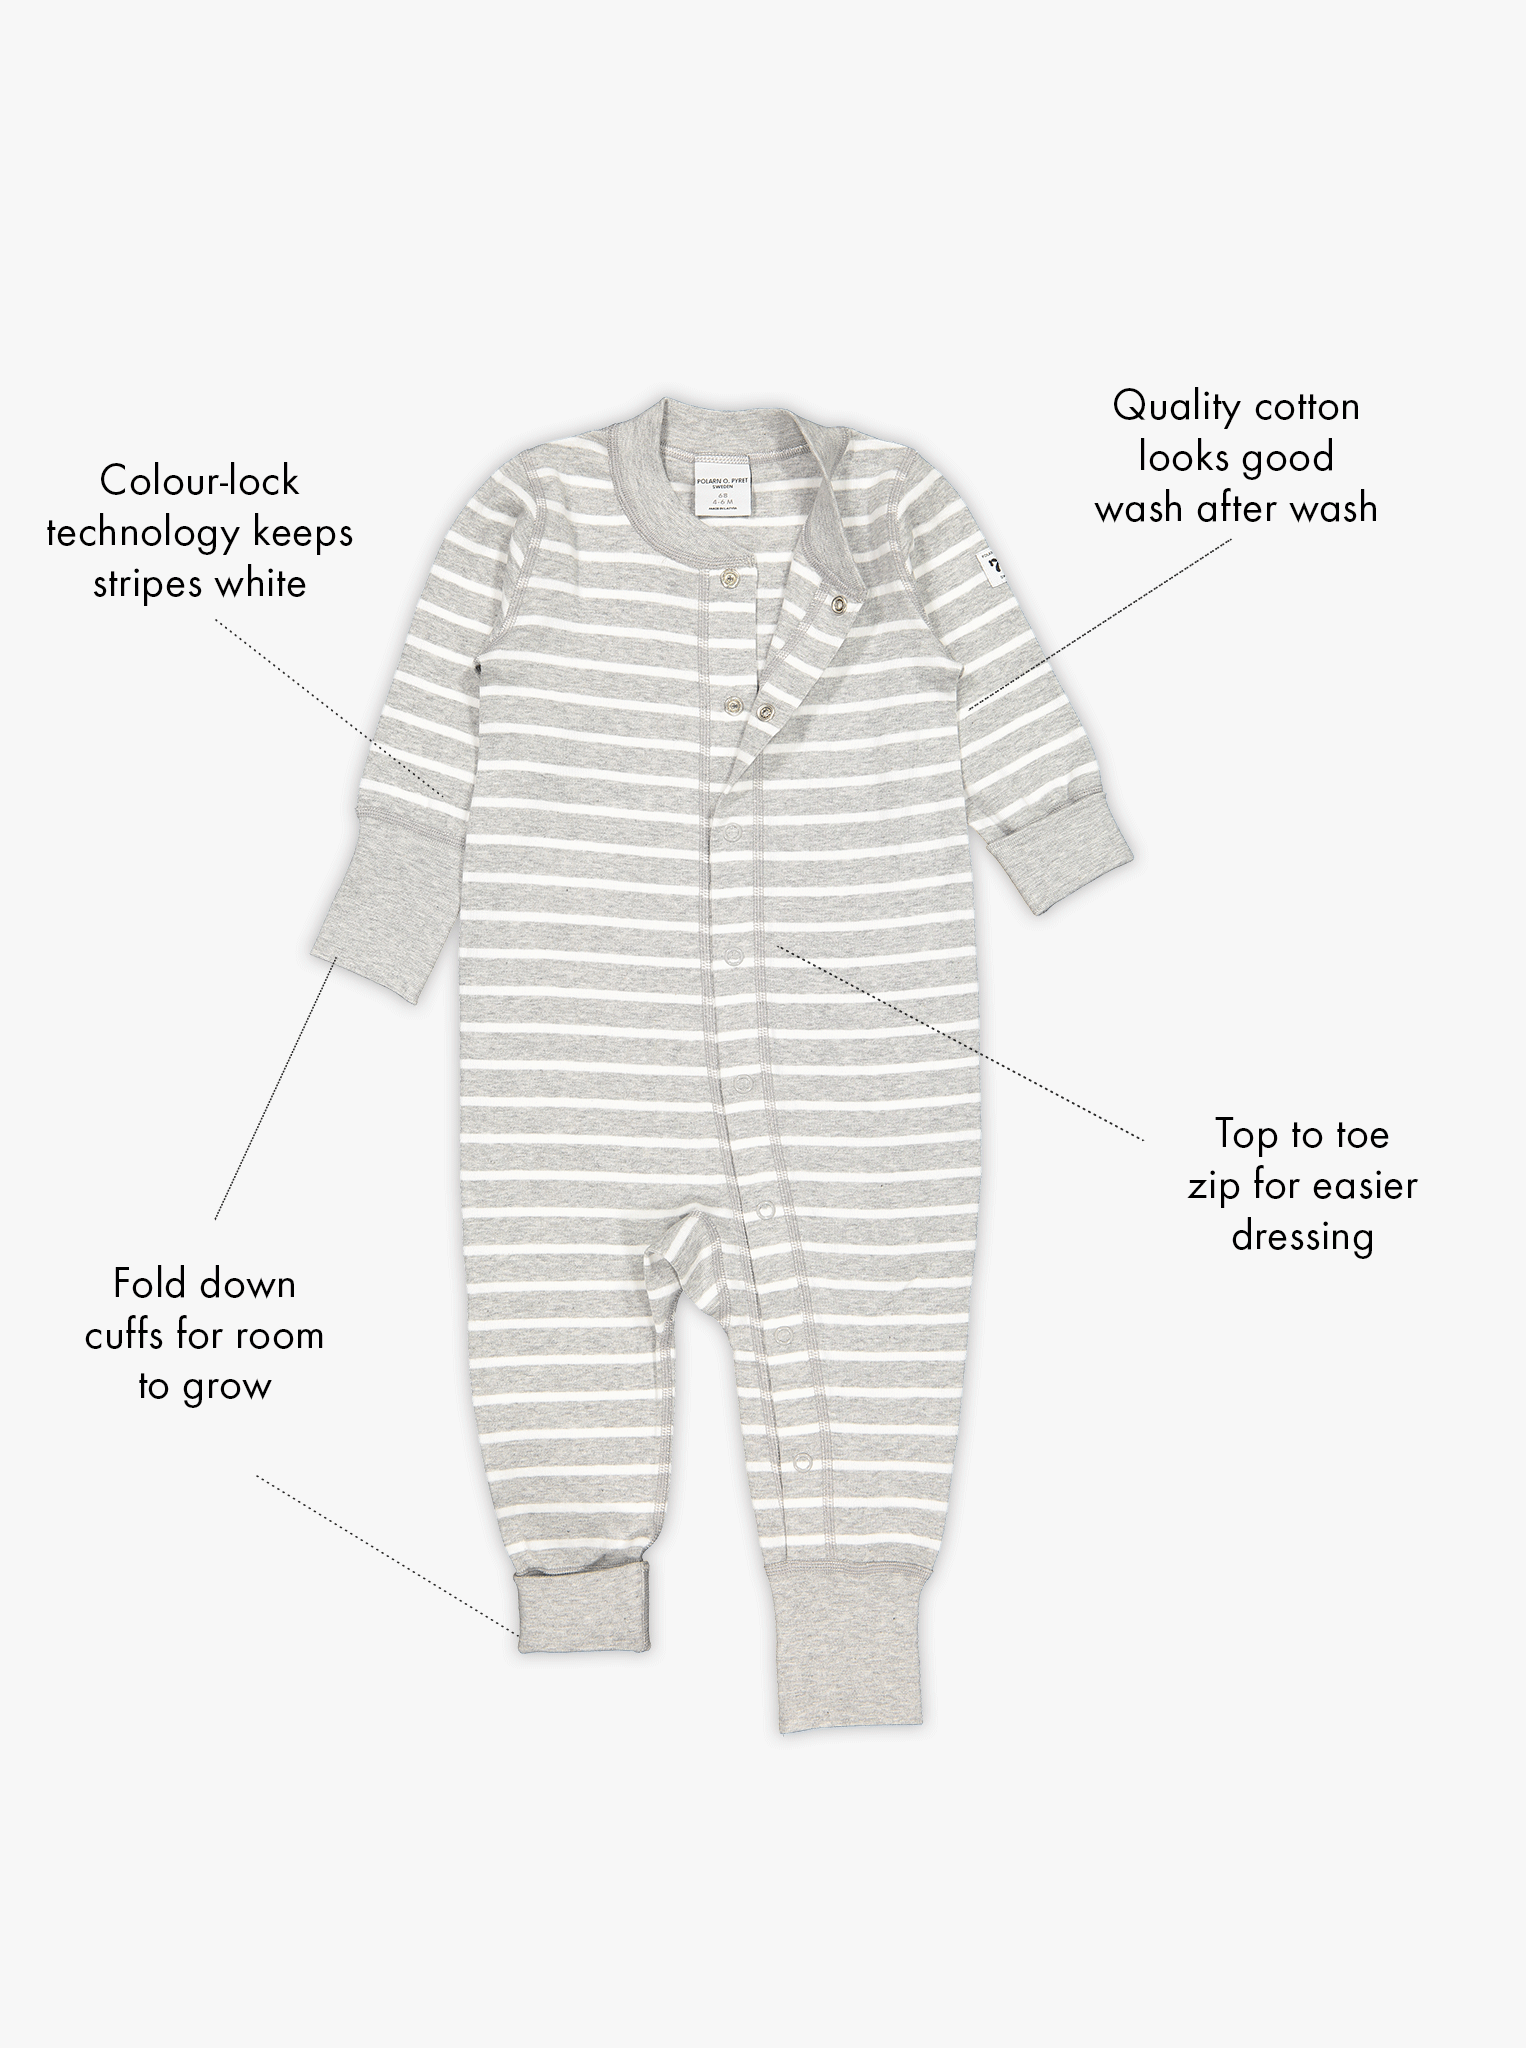 grey and white stripes baby all in one, ethical organic cotton, polarn o. pyret quality